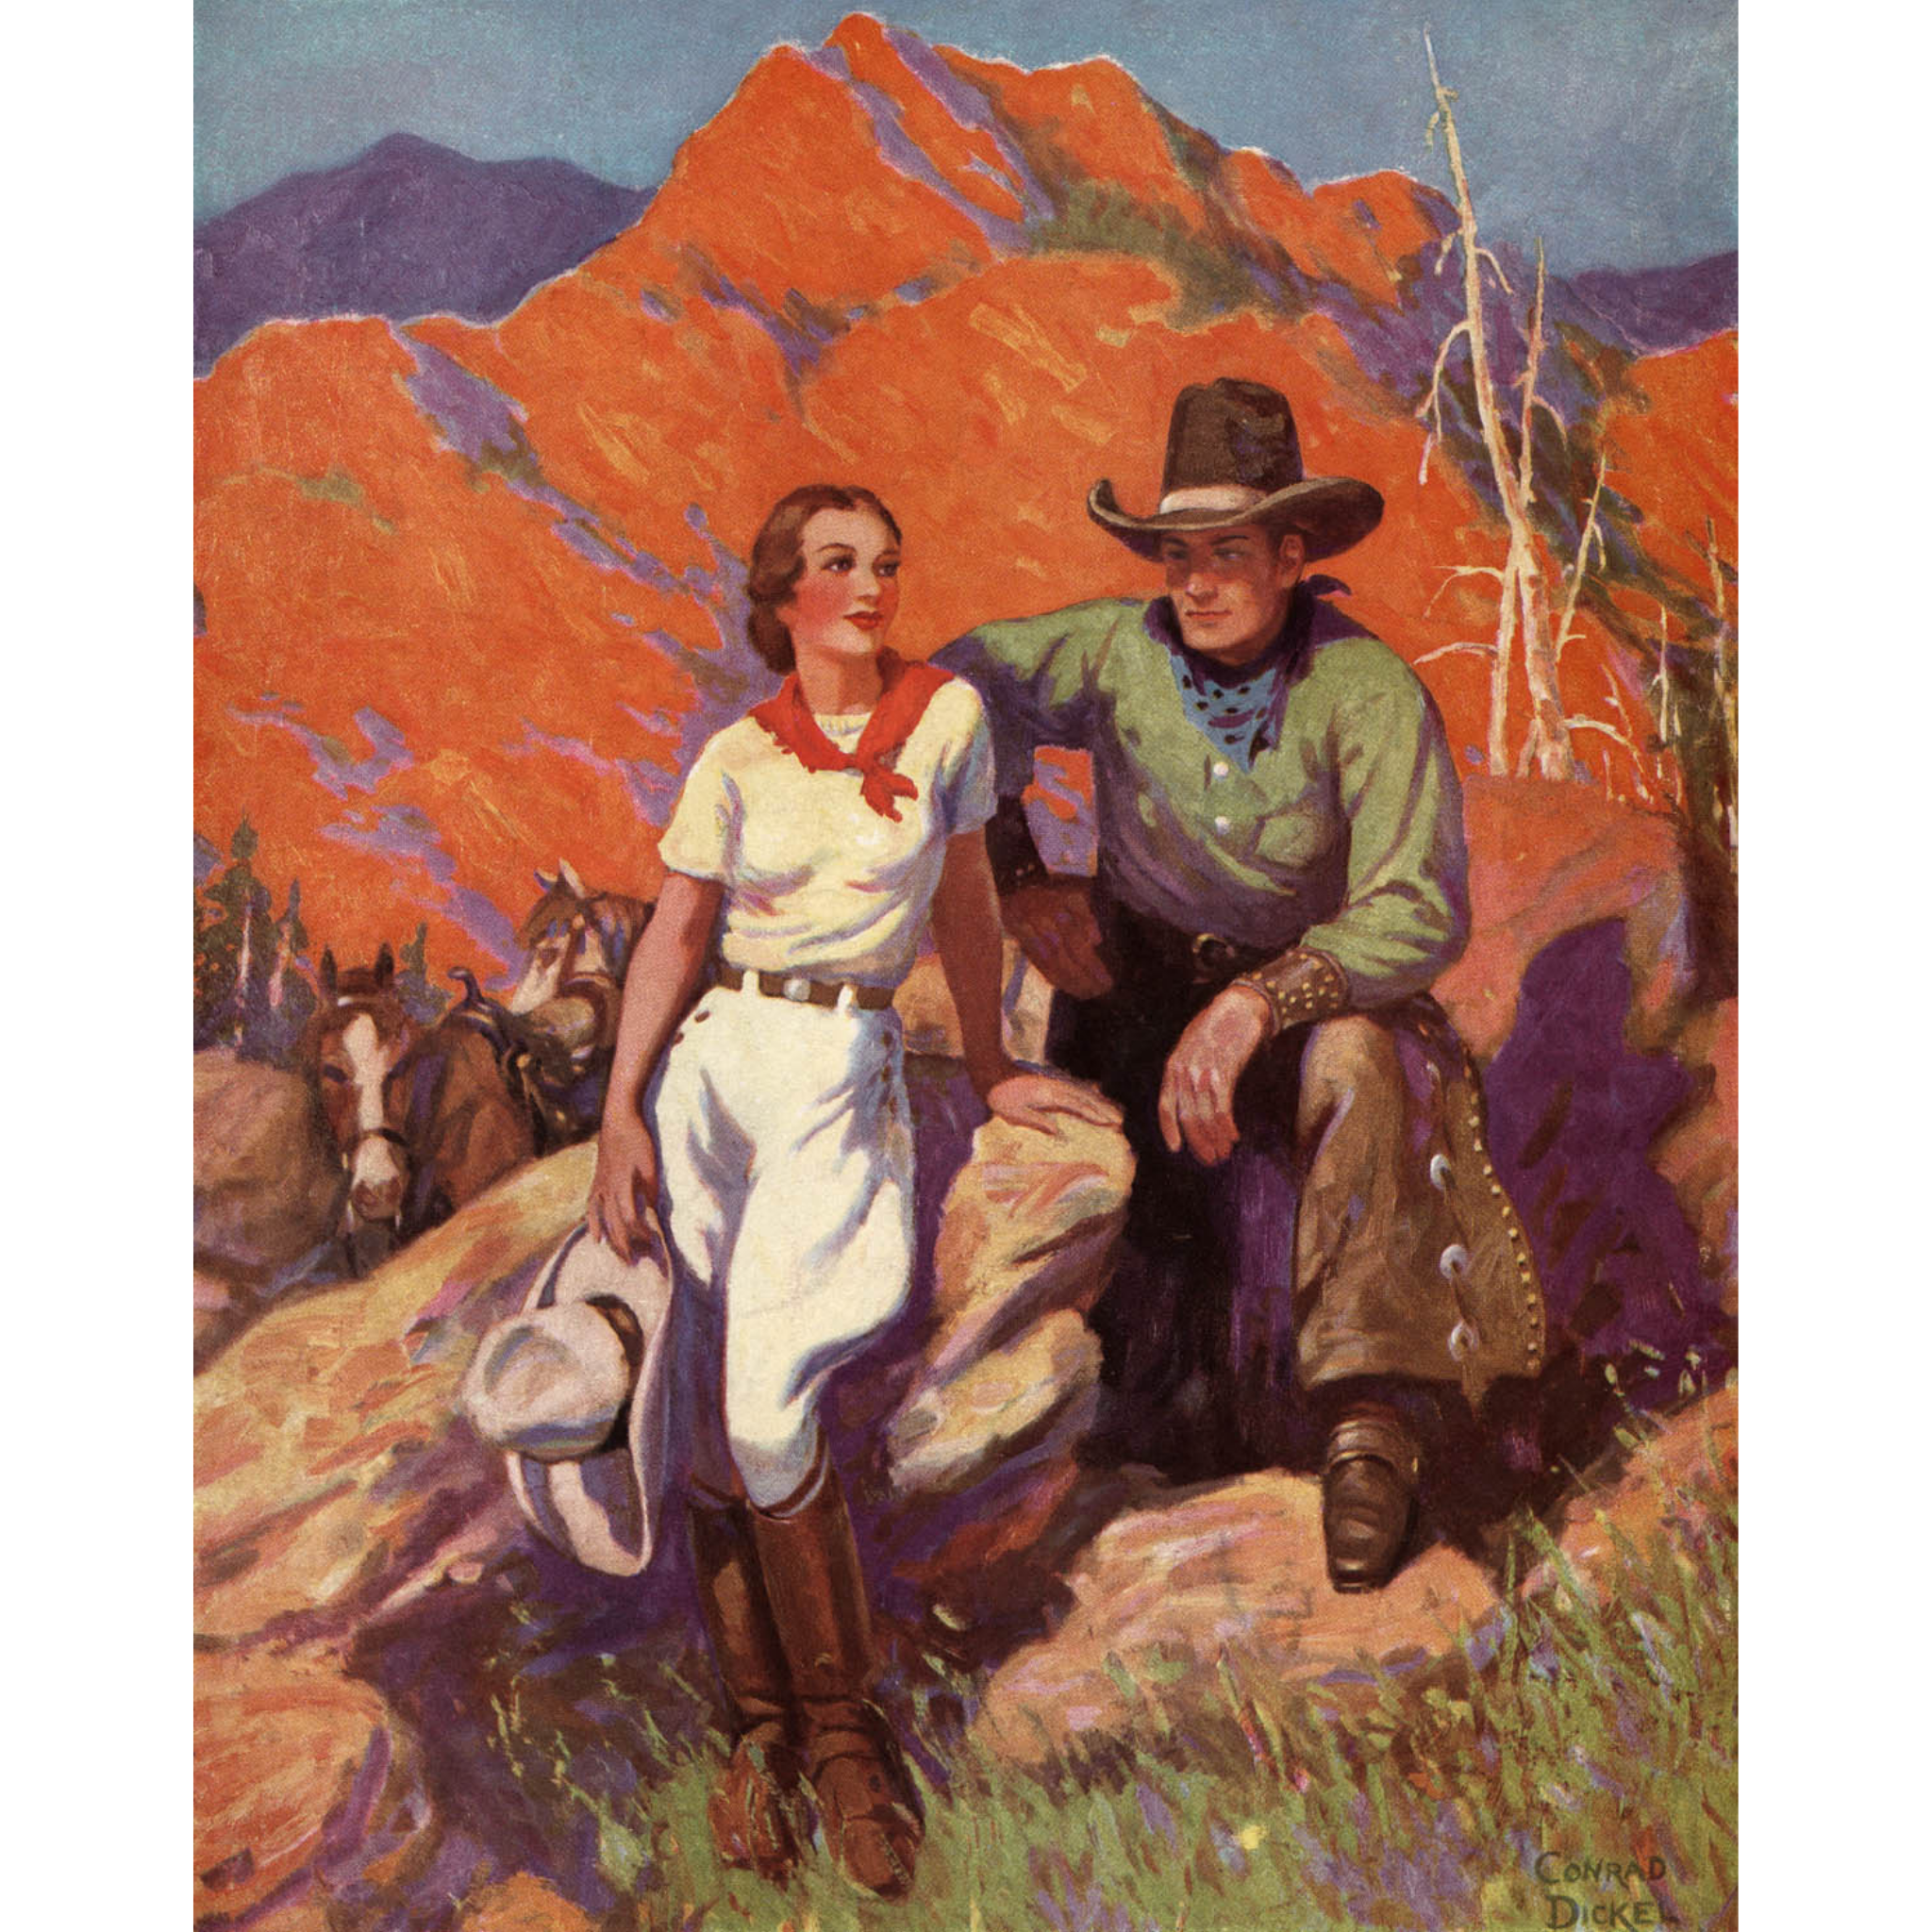 Cowboy and Cowgirl Sitting on Rock - ca. 1935 Conrad Dickel Lithograph